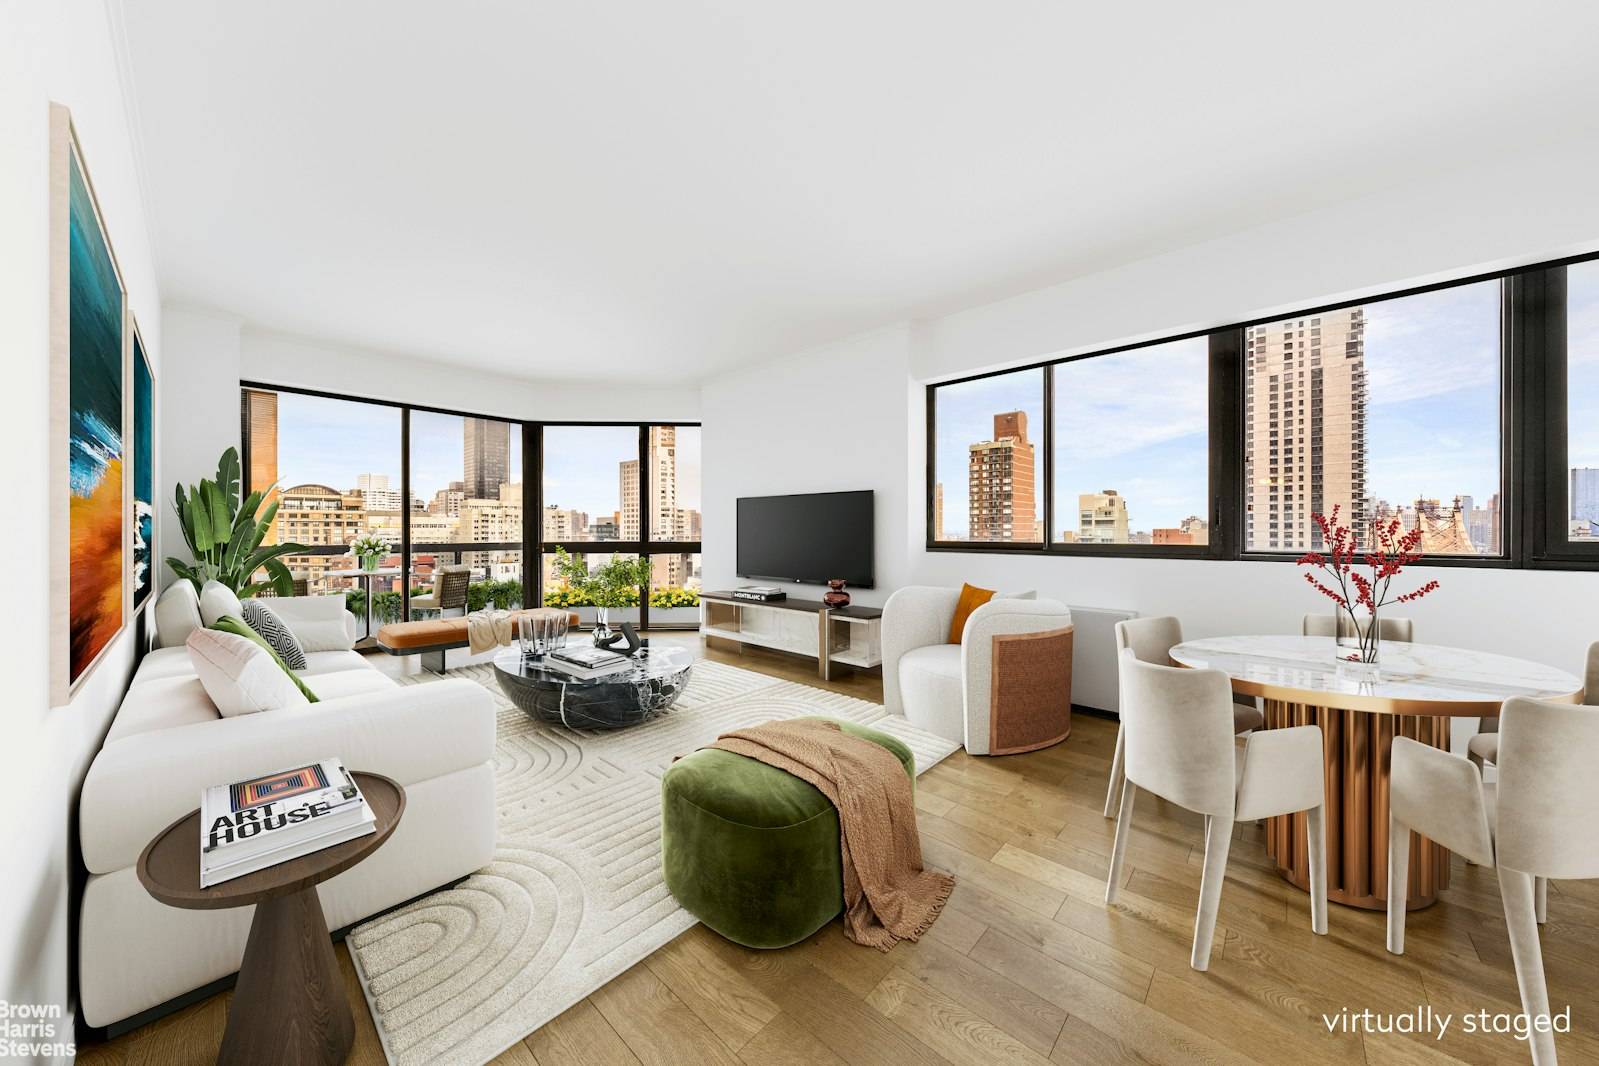 Welcome to this luxurious sun drenched one bedroom, one bathroom condominium nestled in the heart of New York City, offering unparalleled urban living on a high floor with breathtaking views.